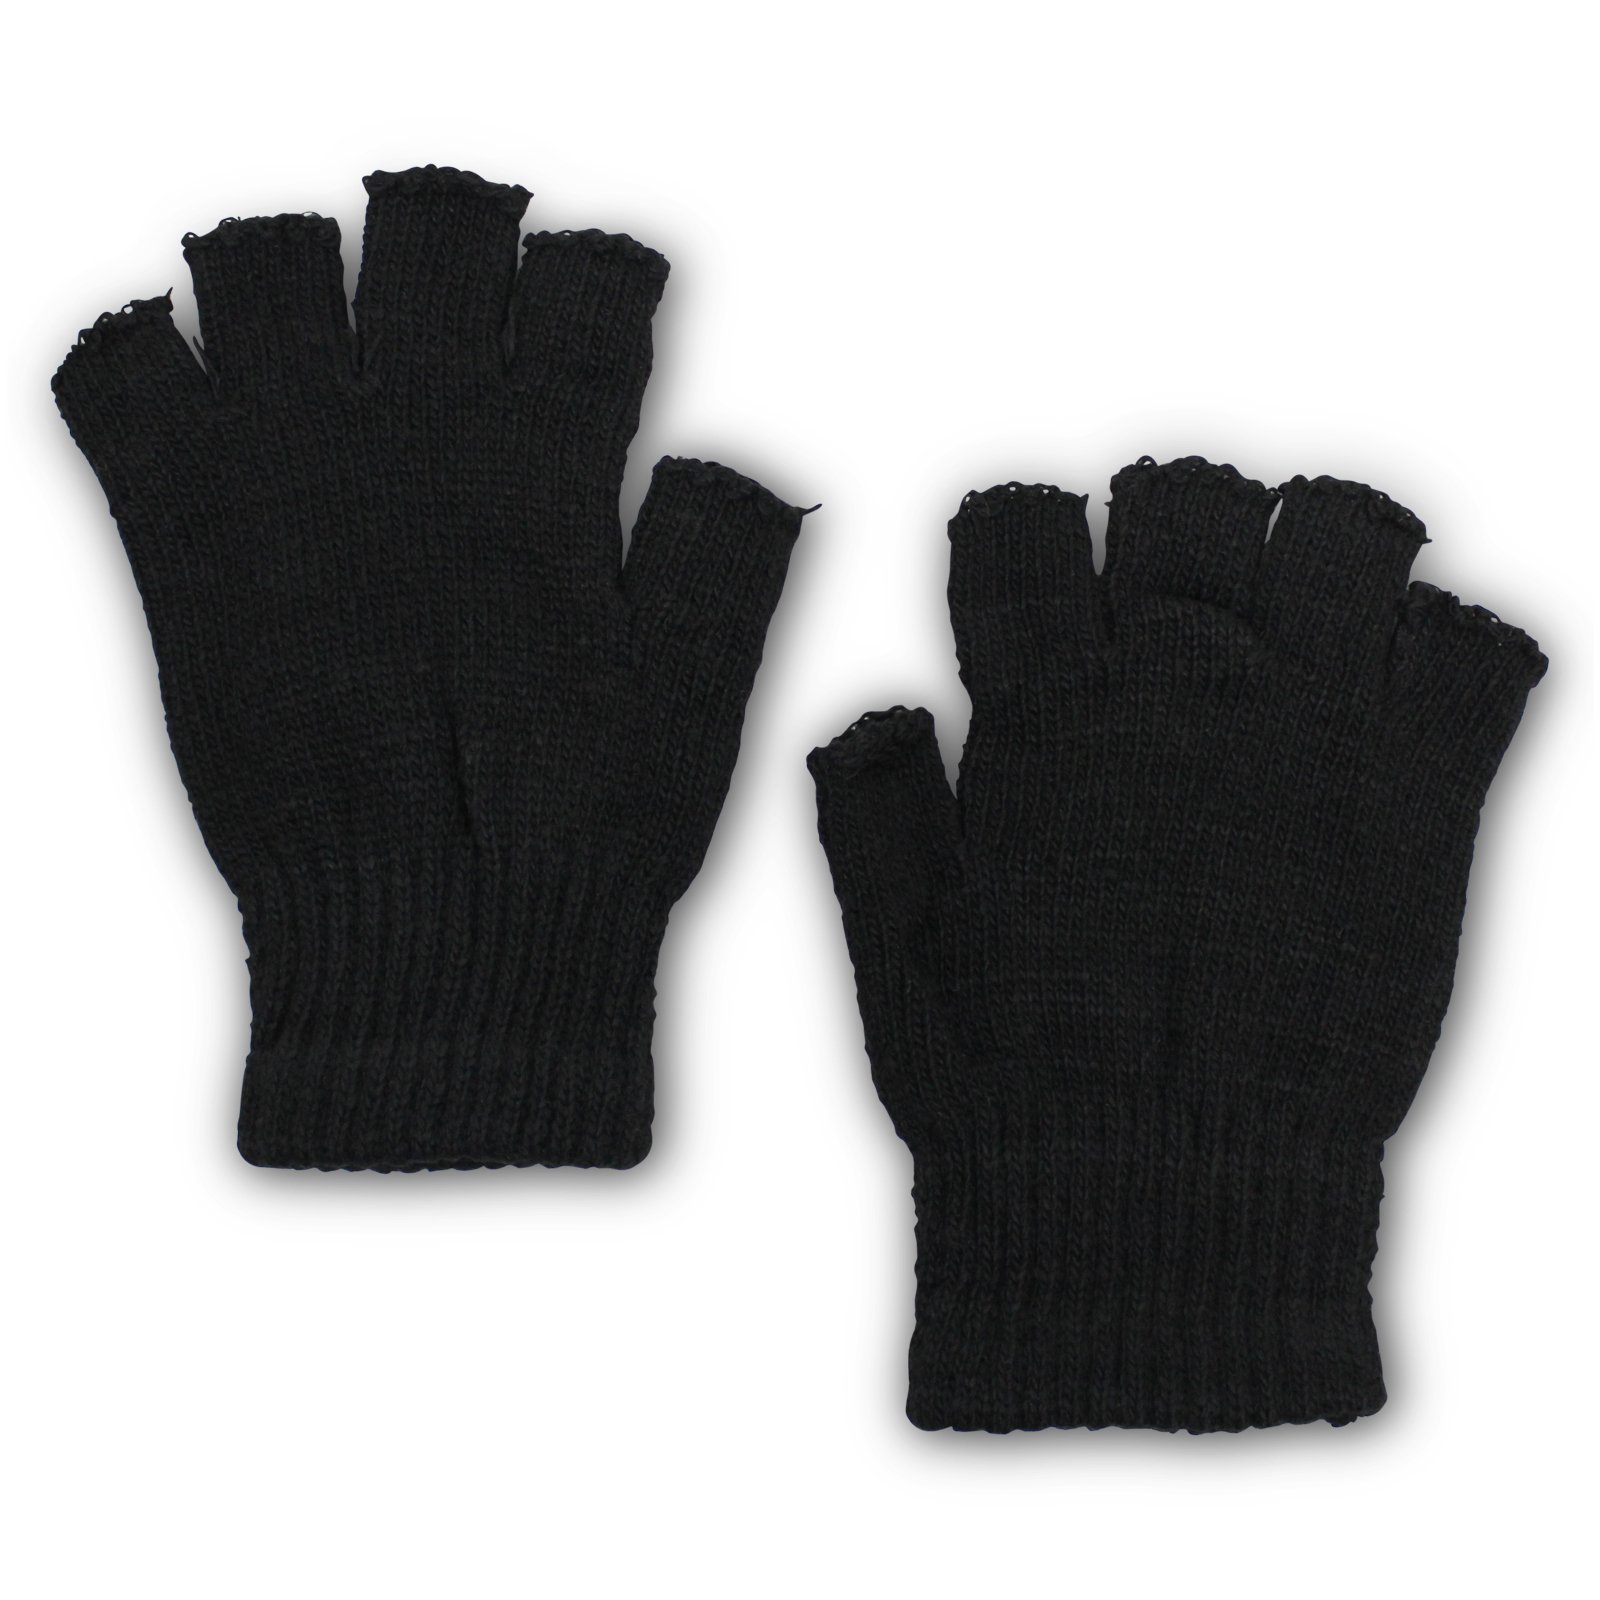 Knitted Fingerless Acrylic Glove - OUTBOUND NEW : Browse our Wide Range ...